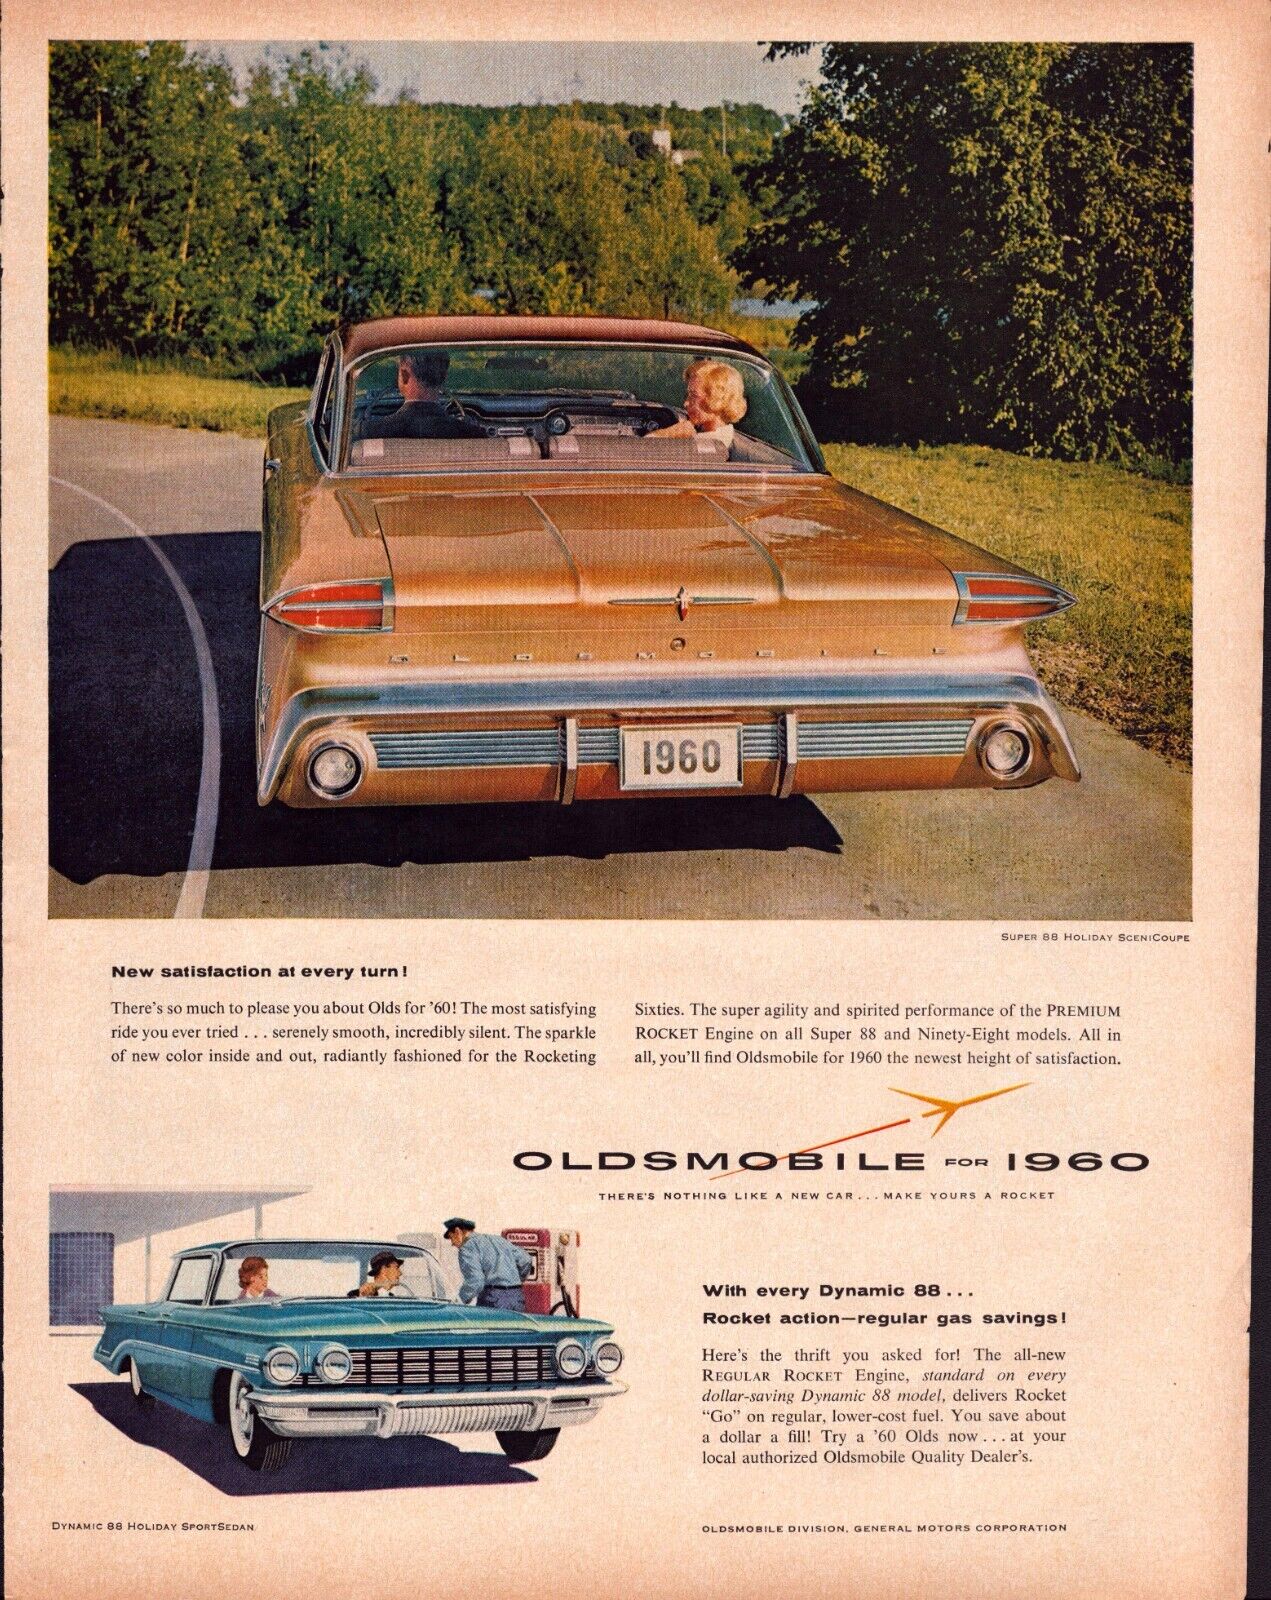 Vintage Print Ad -1960 for Oldsmobile 88 and Delco Batteries